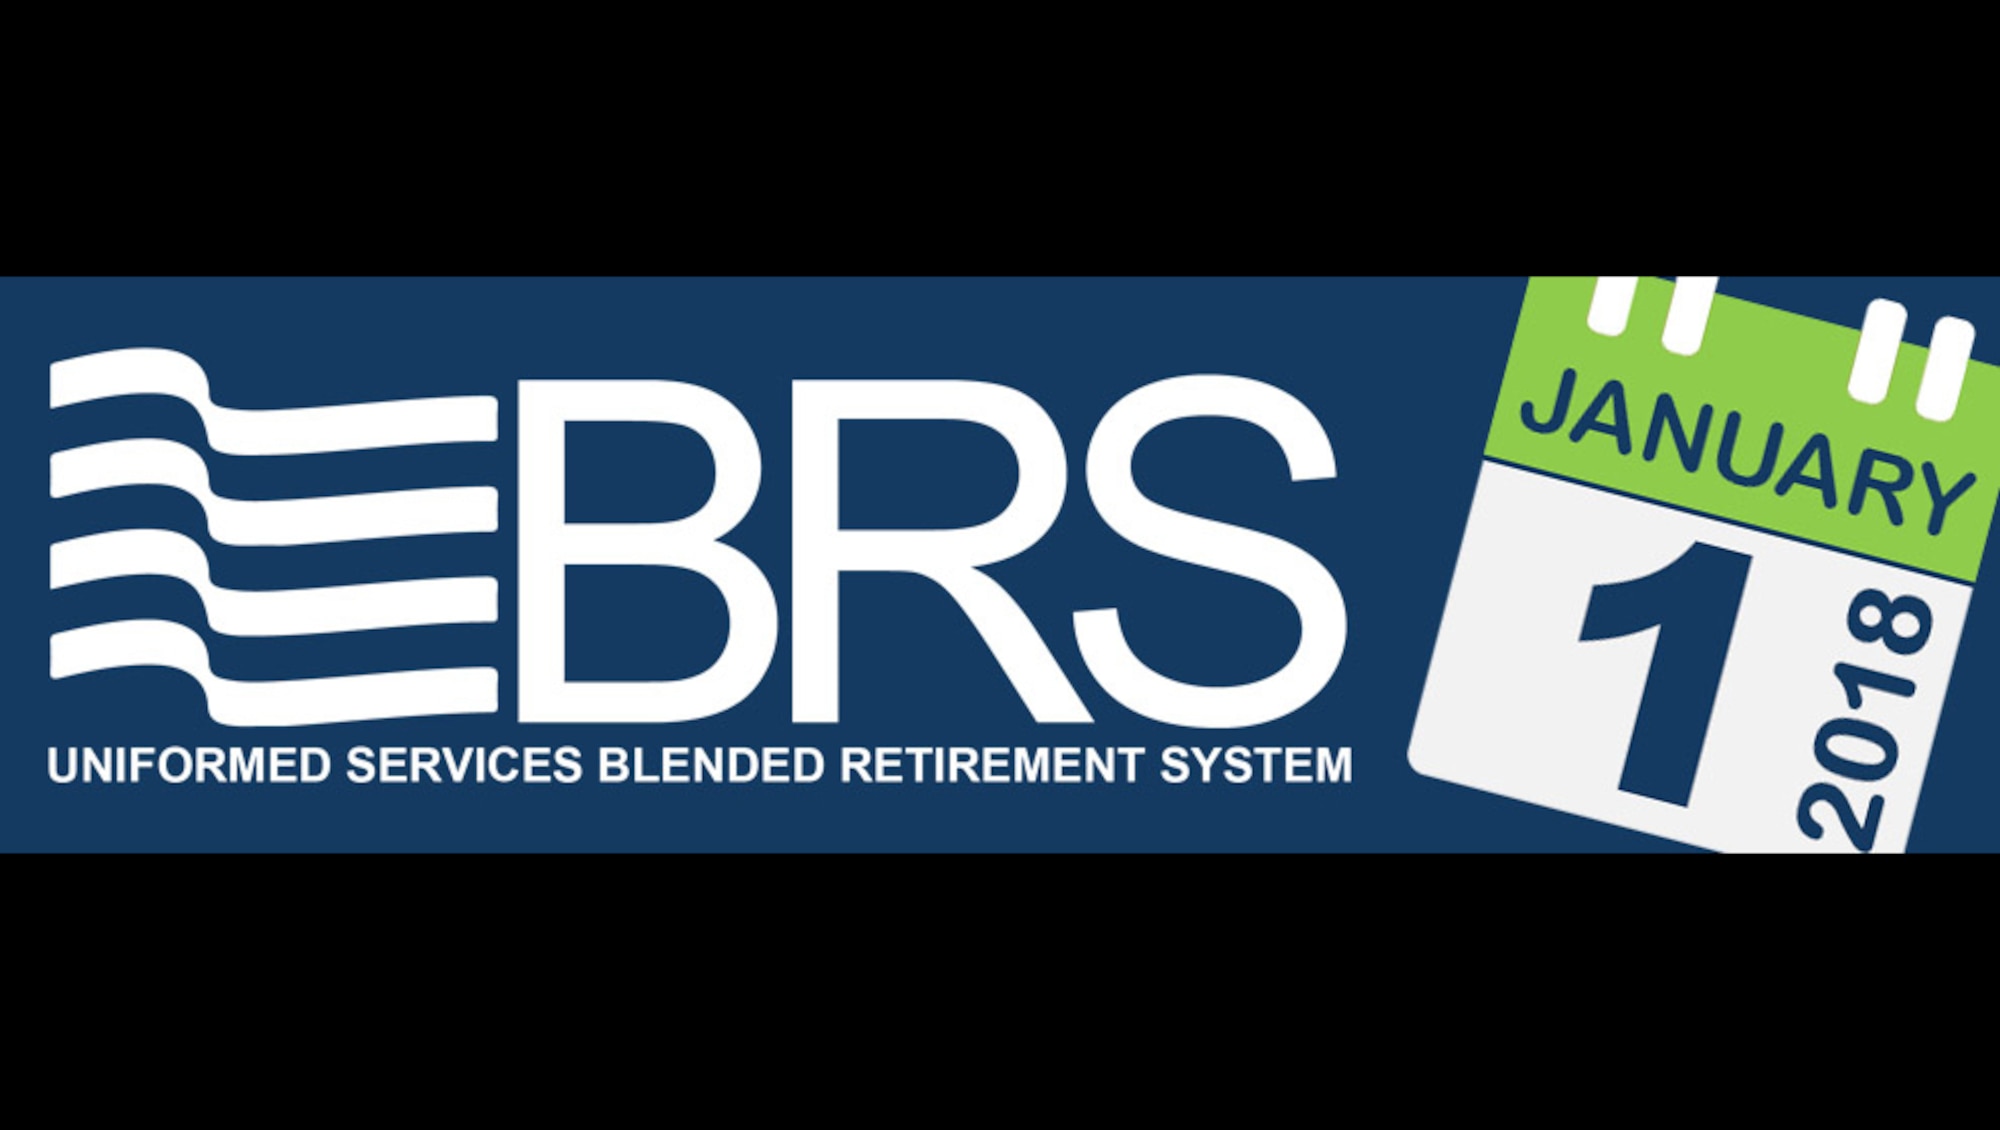 Eligible Airmen have the option to opt into the Blended Retirement System beginning January 1, 2018, and concluding December 31, 2018. Airmen can begin the opt-in process by visiting MyPay and clicking on the BRS Opt-In link. (Courtesy graphic)